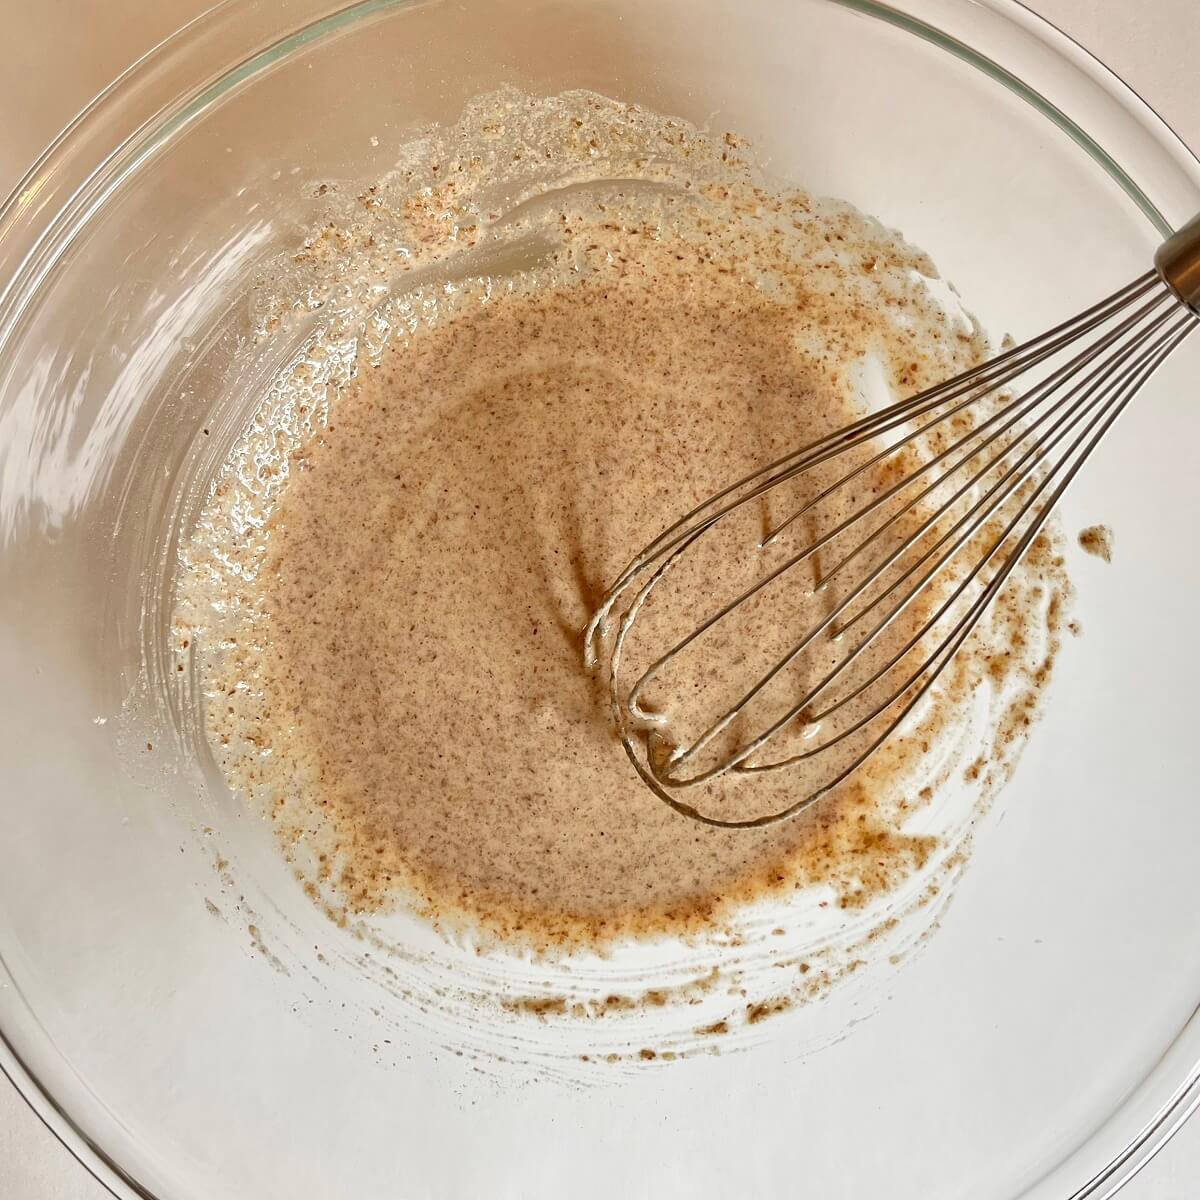 Raw cracker batter being mixed with a whisk in a glass mixing bowl.